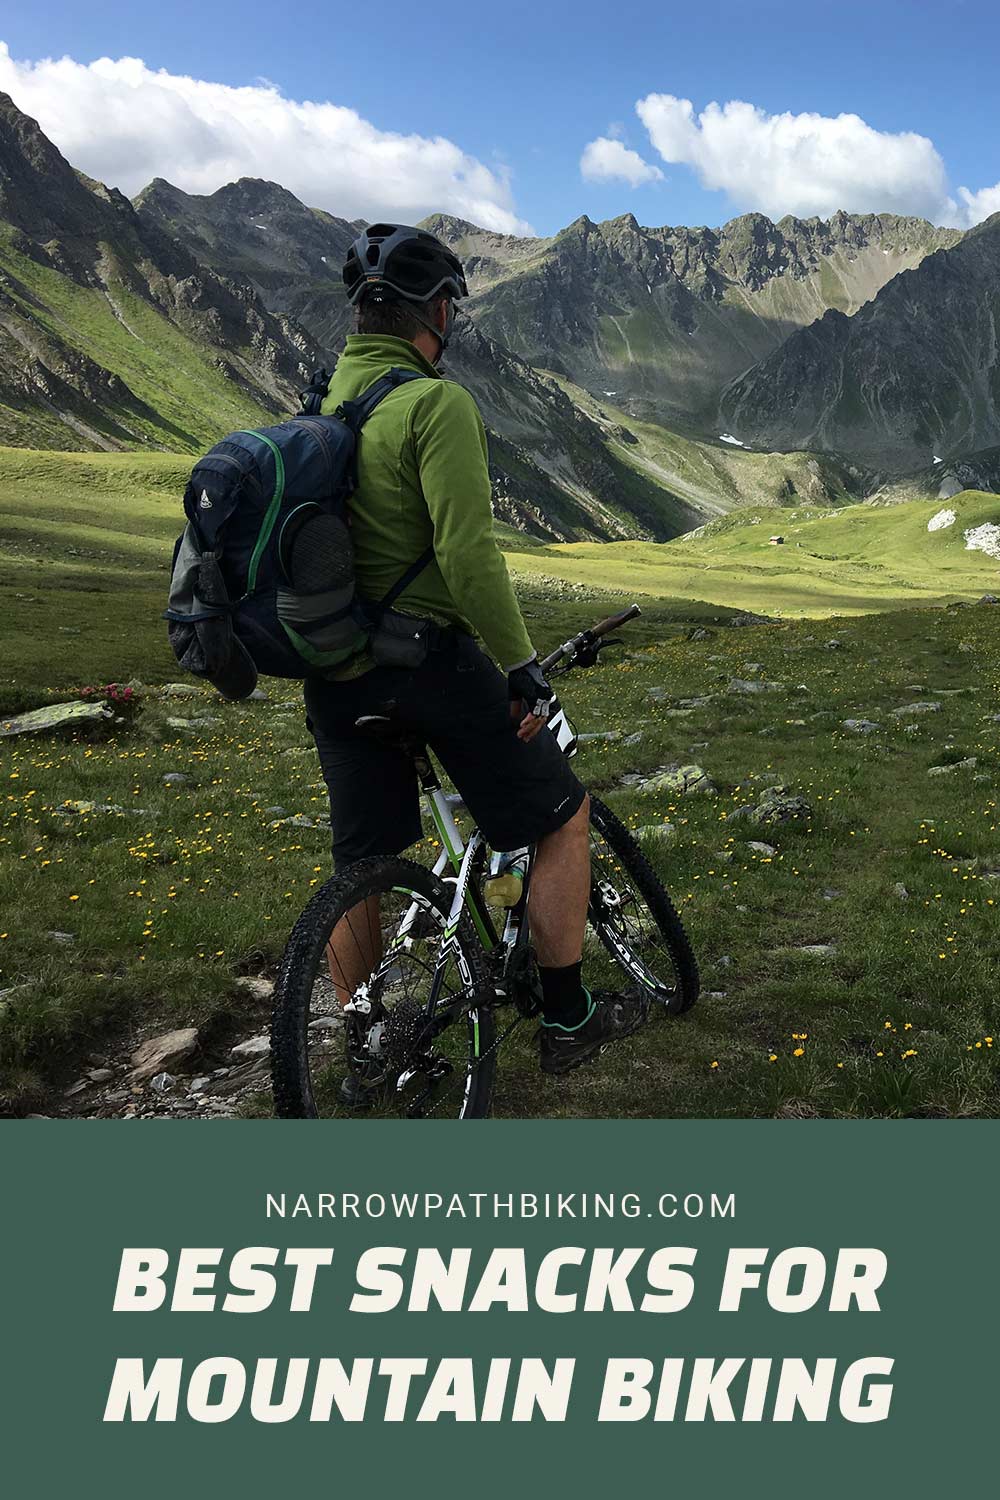 Man in a green jacket on a MTB with a backpack - Best Snacks for Mountain Biking